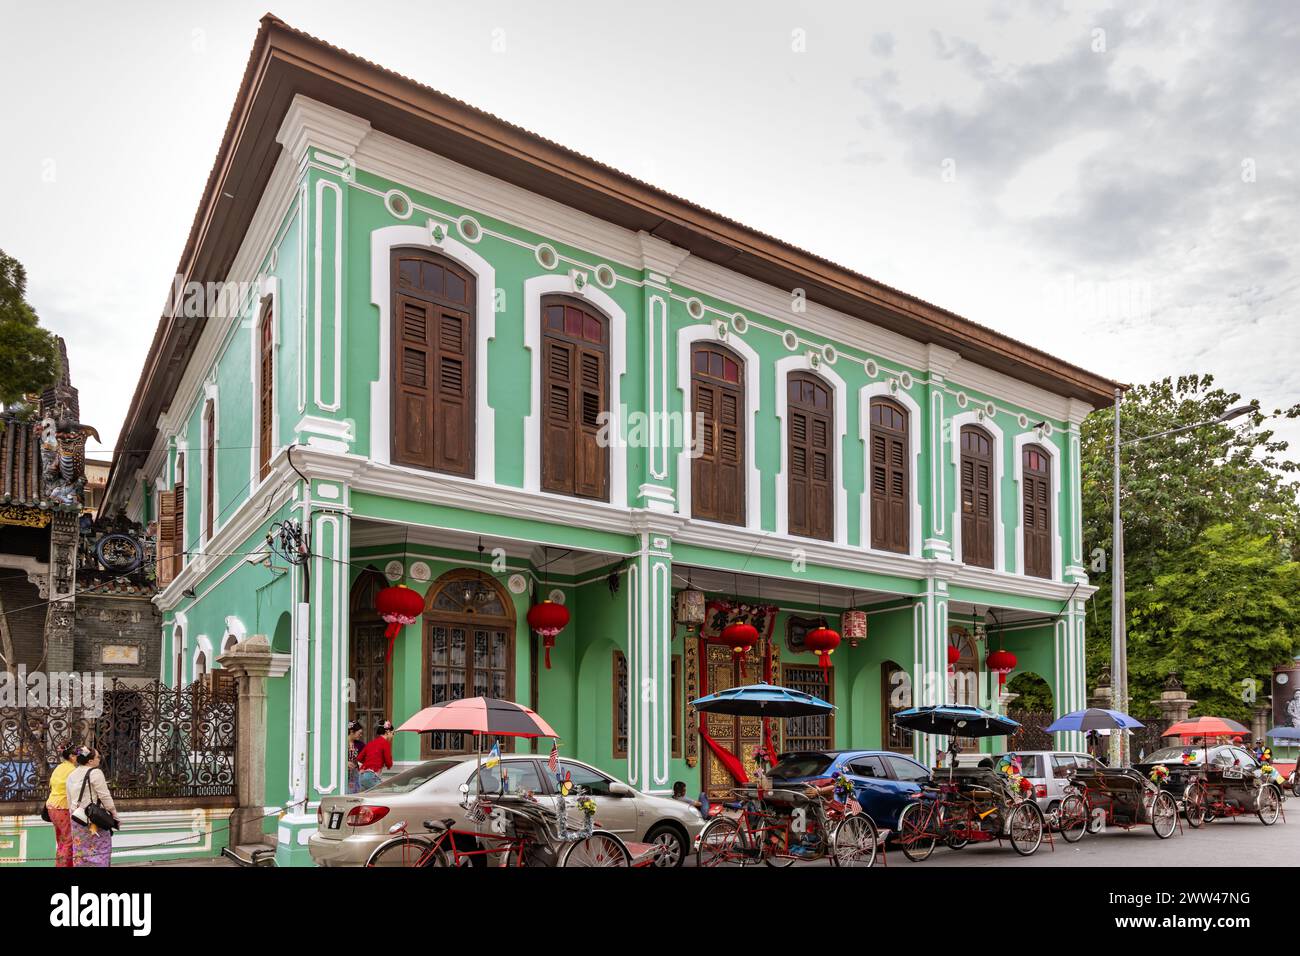 Pinang Peranakan Mansion in Georgetown, Penang, a museum containing antiques and showcasing Peranakans customs, interior design and lifestyles Stock Photo